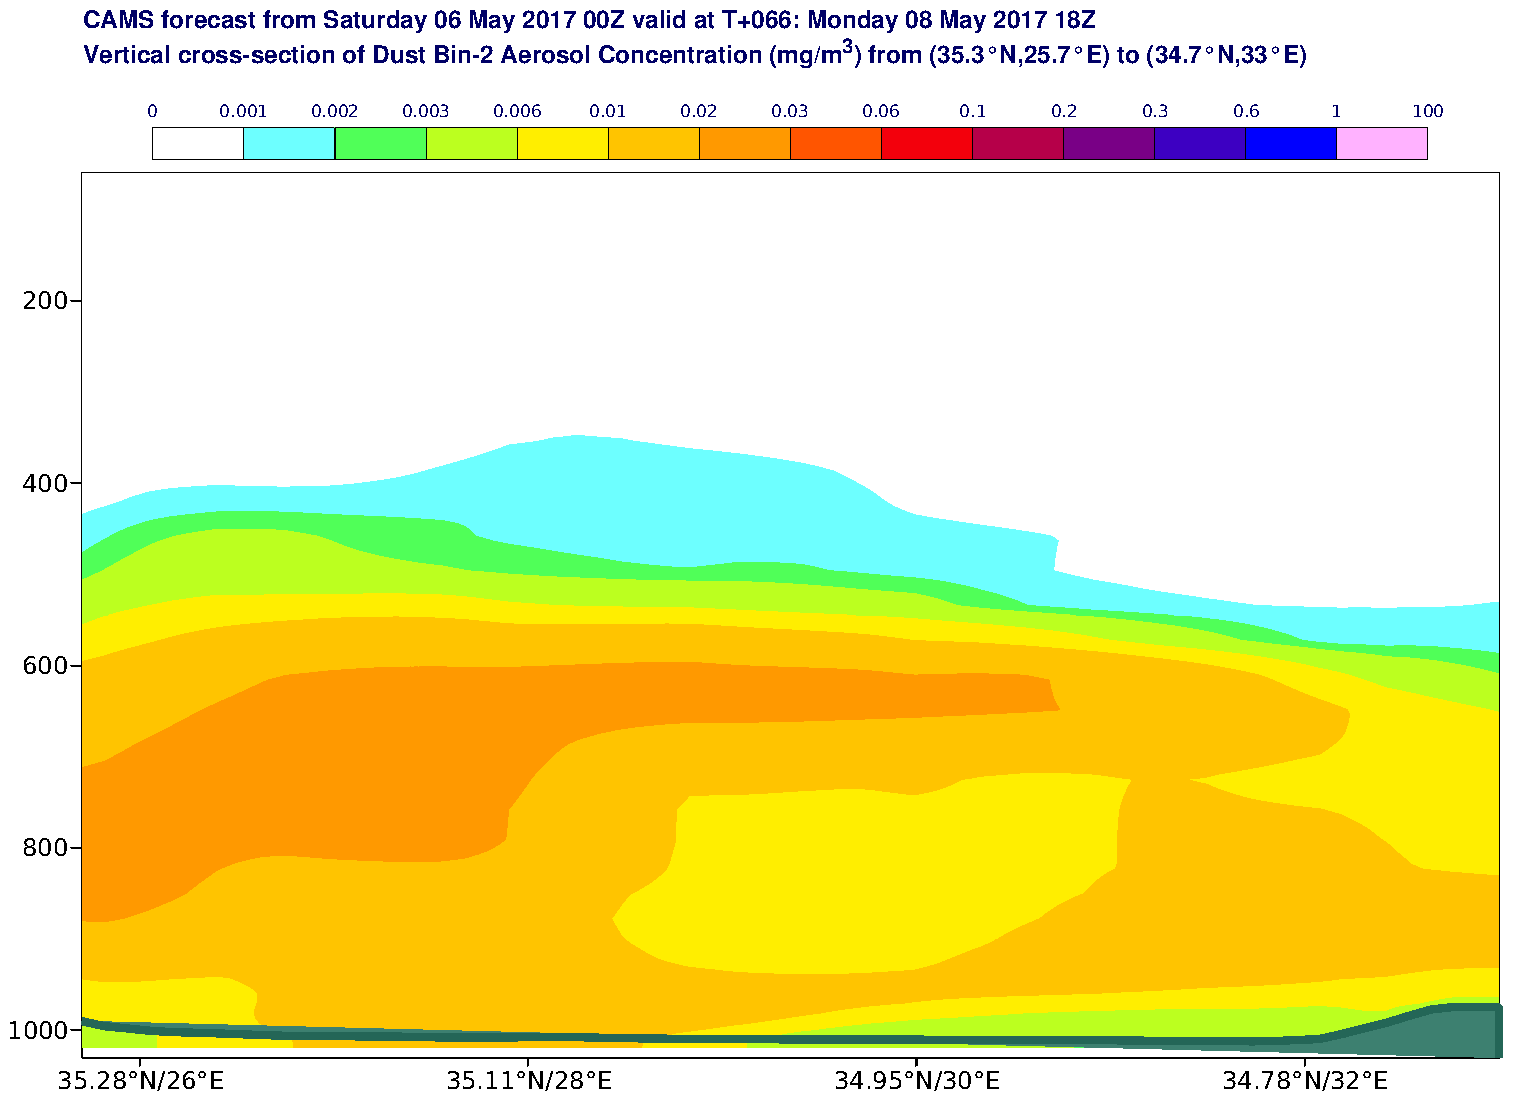 Vertical cross-section of Dust Bin-2 Aerosol Concentration (mg/m3) valid at T66 - 2017-05-08 18:00